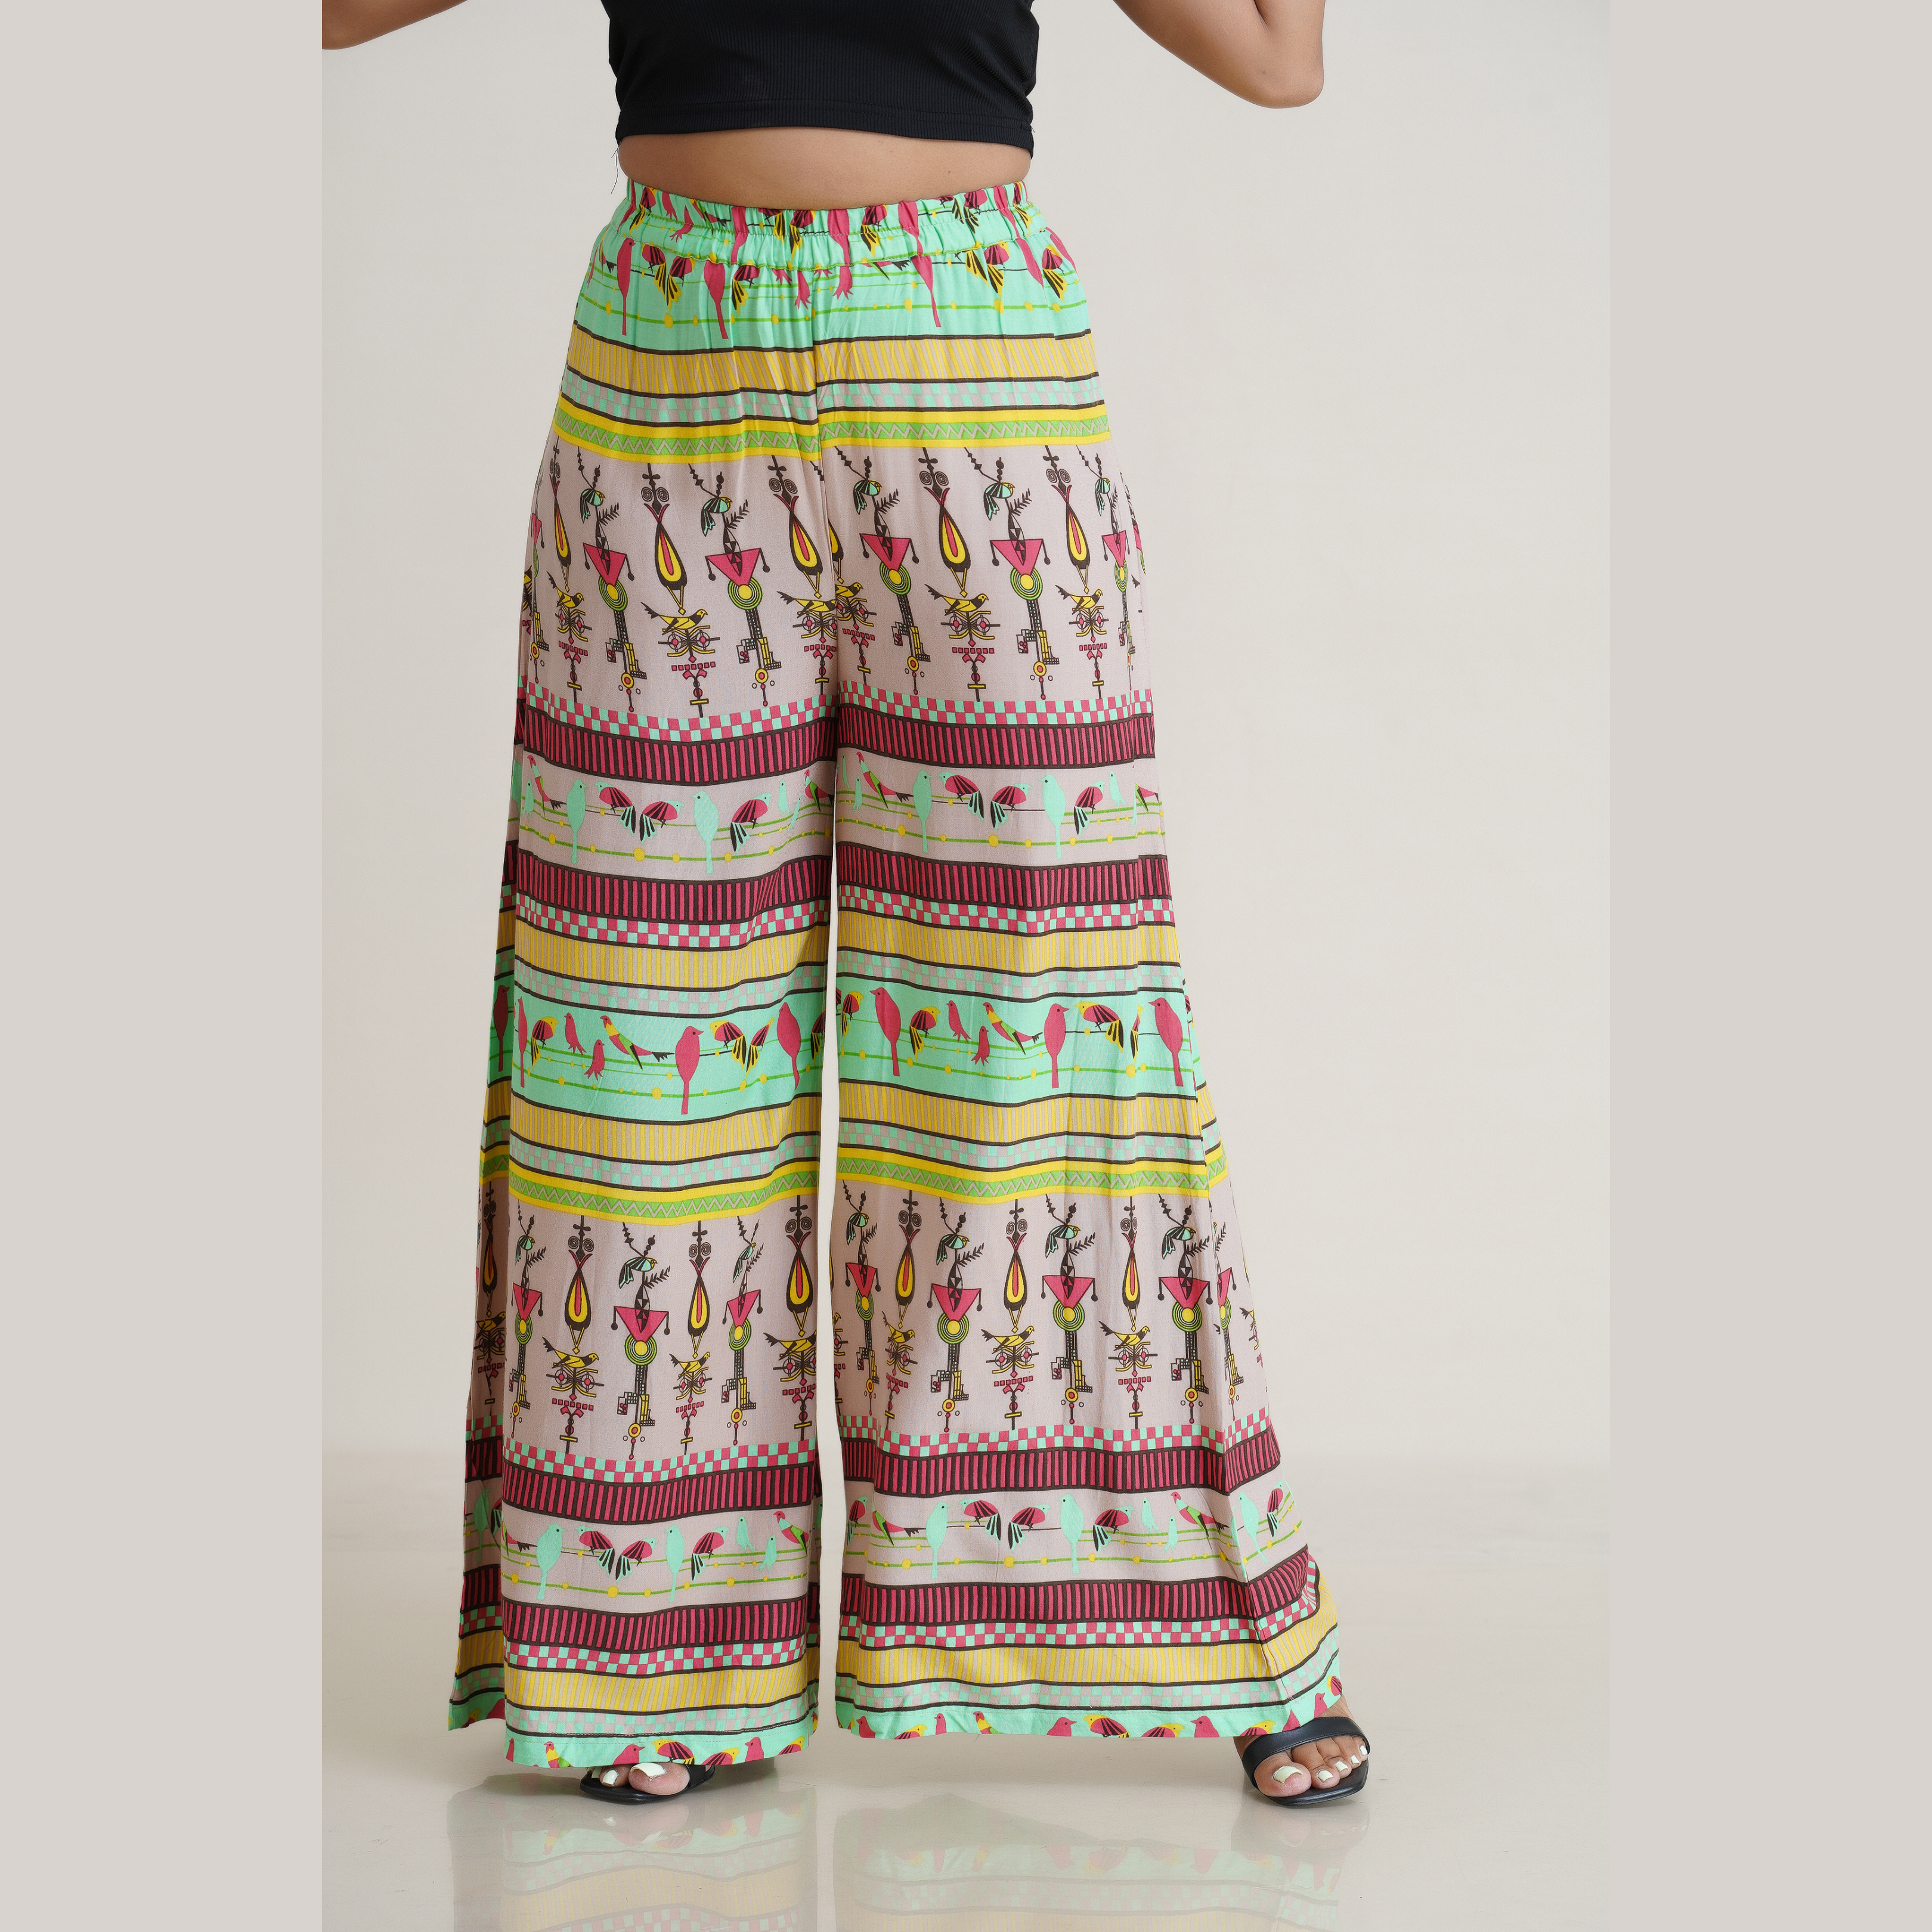 Palazzo Pants In Patna, Bihar At Best Price | Palazzo Pants Manufacturers,  Suppliers In Patna